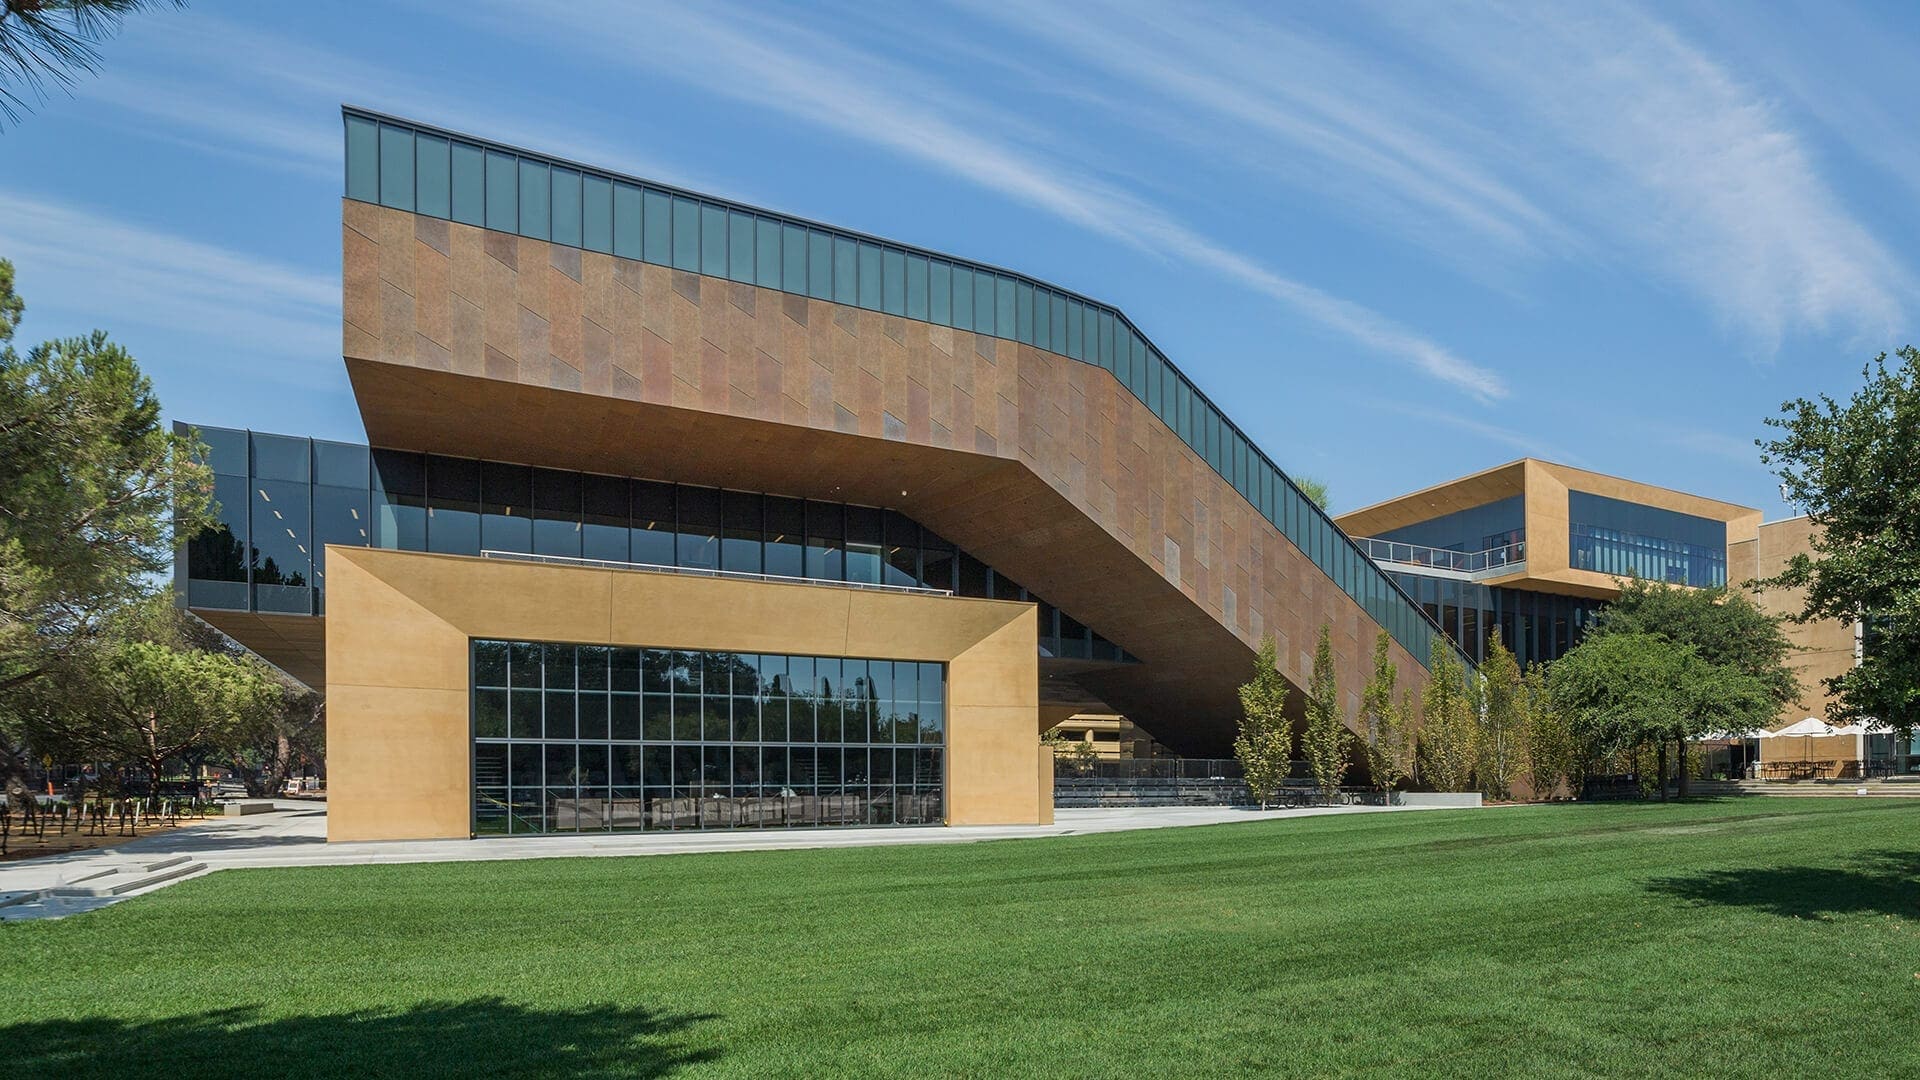 McMurtry Building in Stanford, California, designed by Diller Scofidio + Renfro.